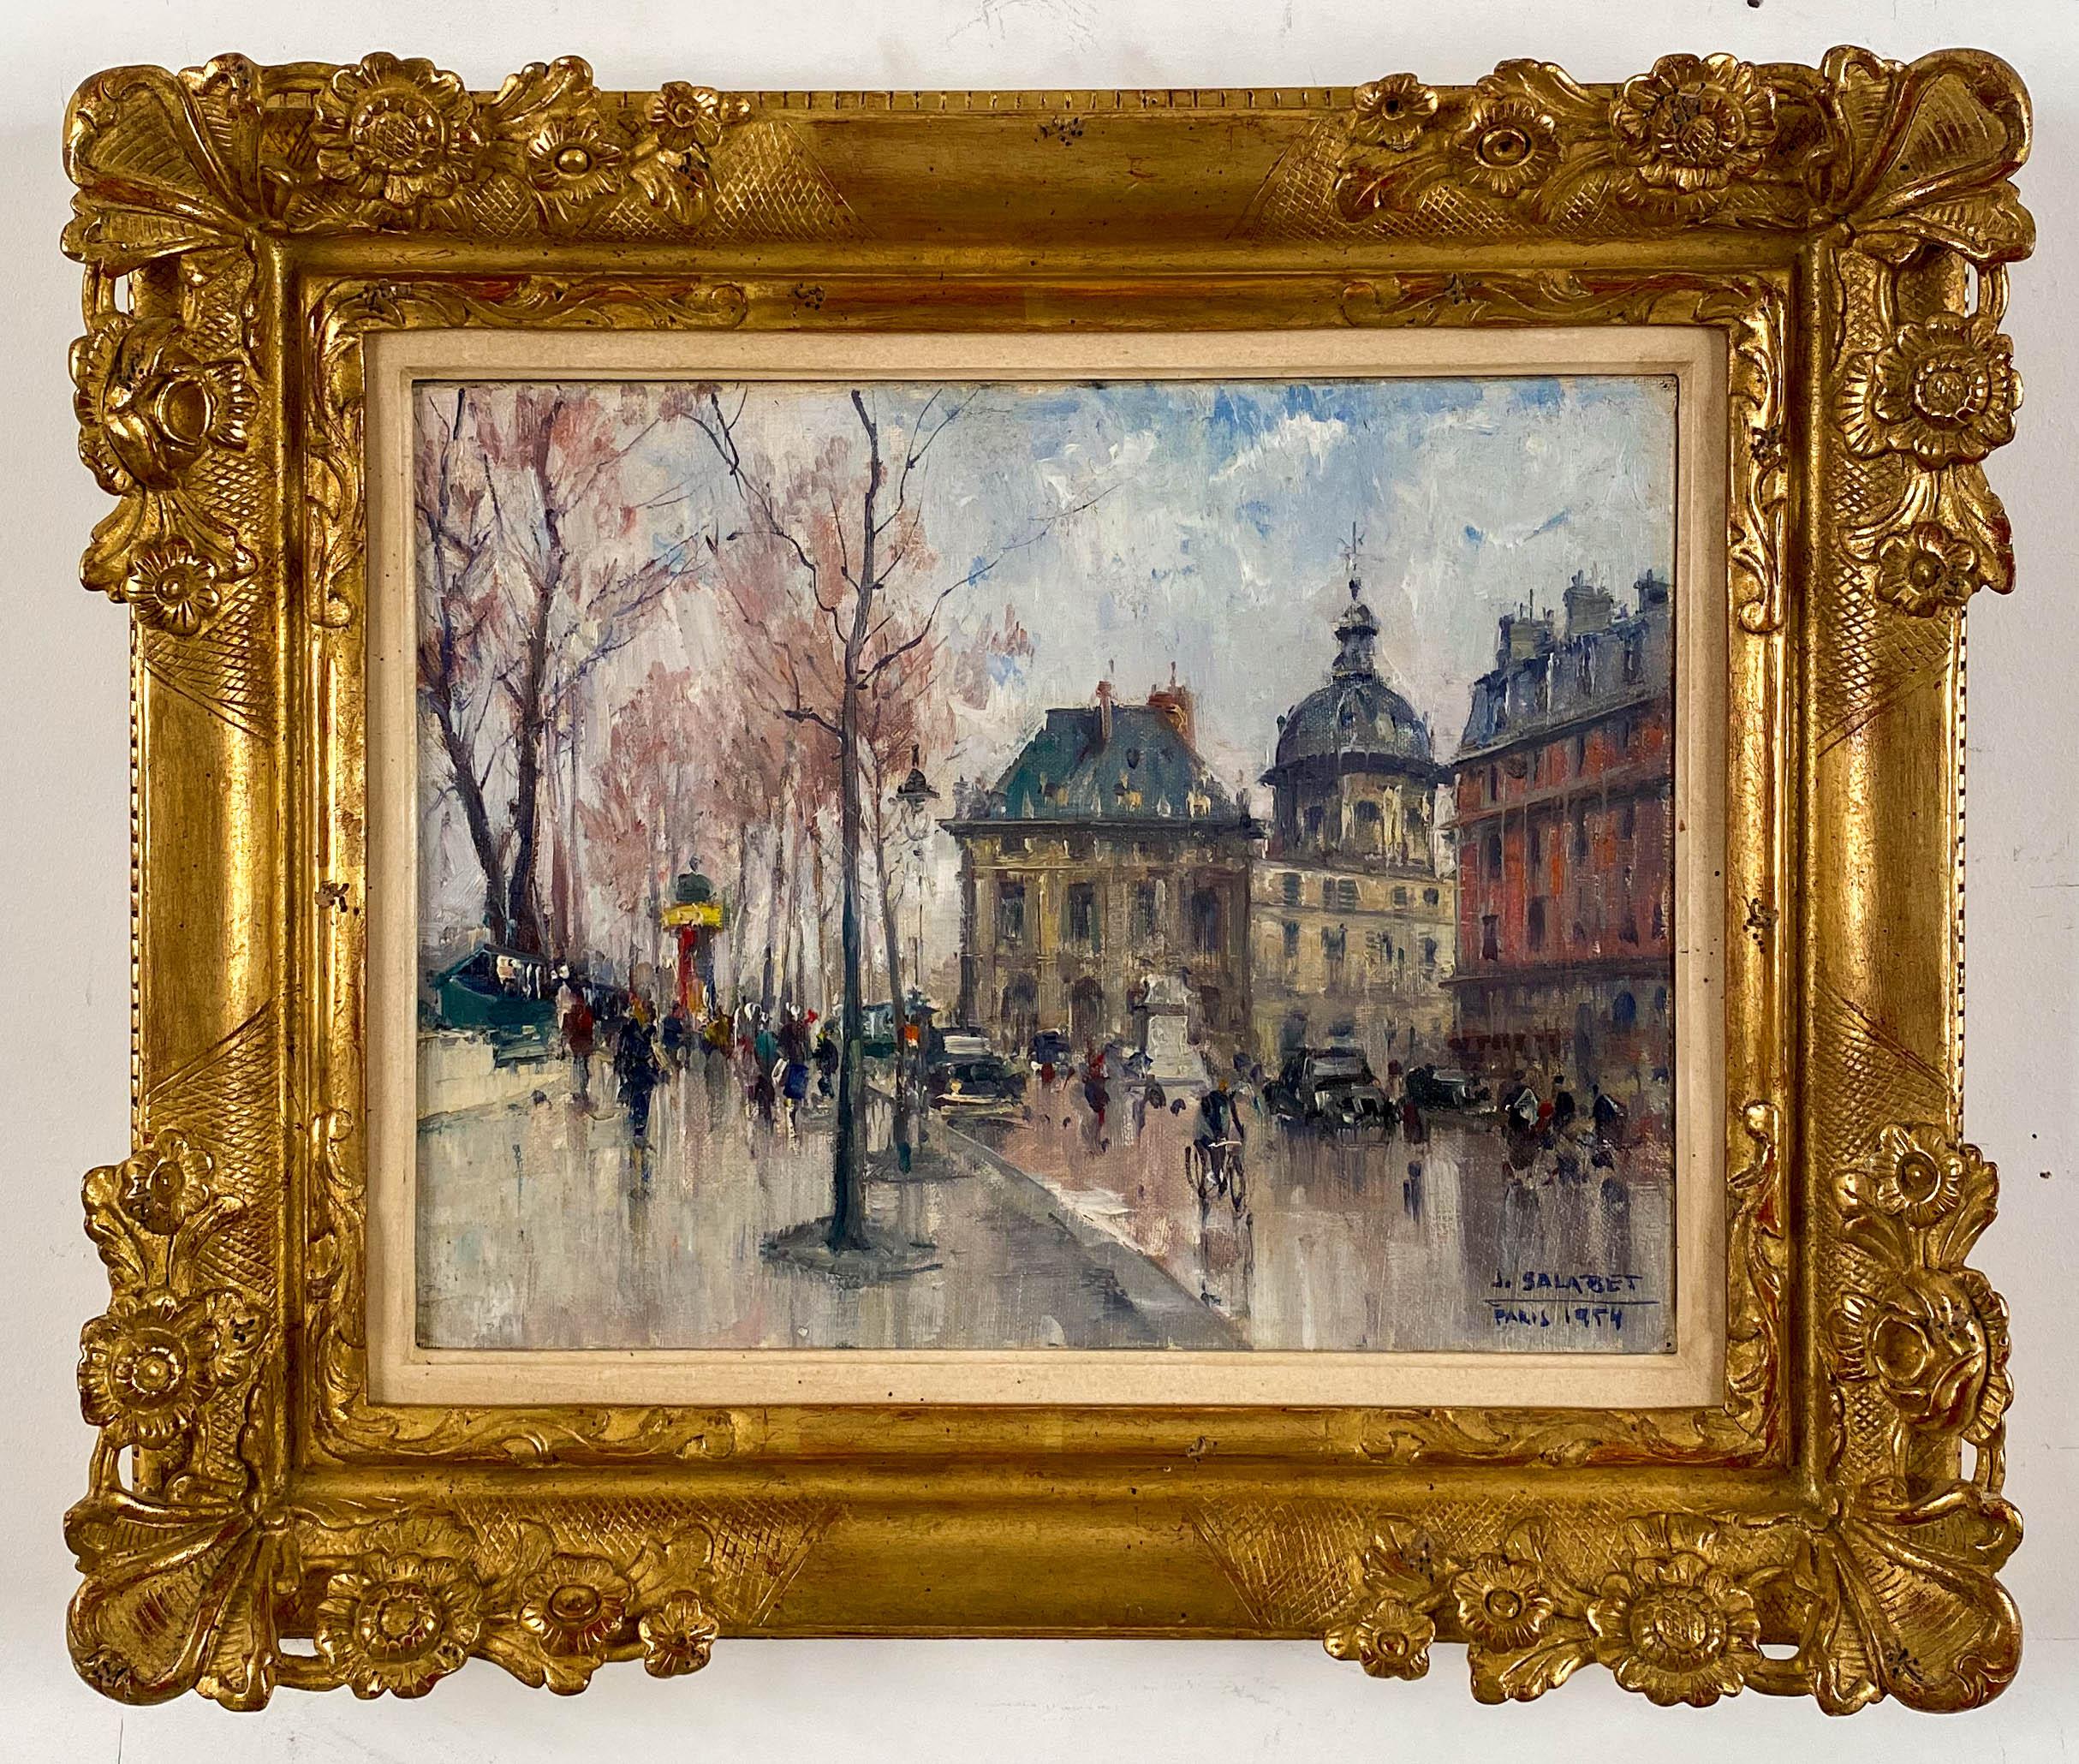 Jean Salabet
French, 20th Century
Les Bouquiniste, Paris

Oil on canvas 
10 ¾ by 13 ¾ in.   W/frame 16 ½ by 19 ½ in.
Signed lower right & dated 1954

Jean Salabet was a School of Paris painter know for his colorful Parisian cityscapes. 
His work is